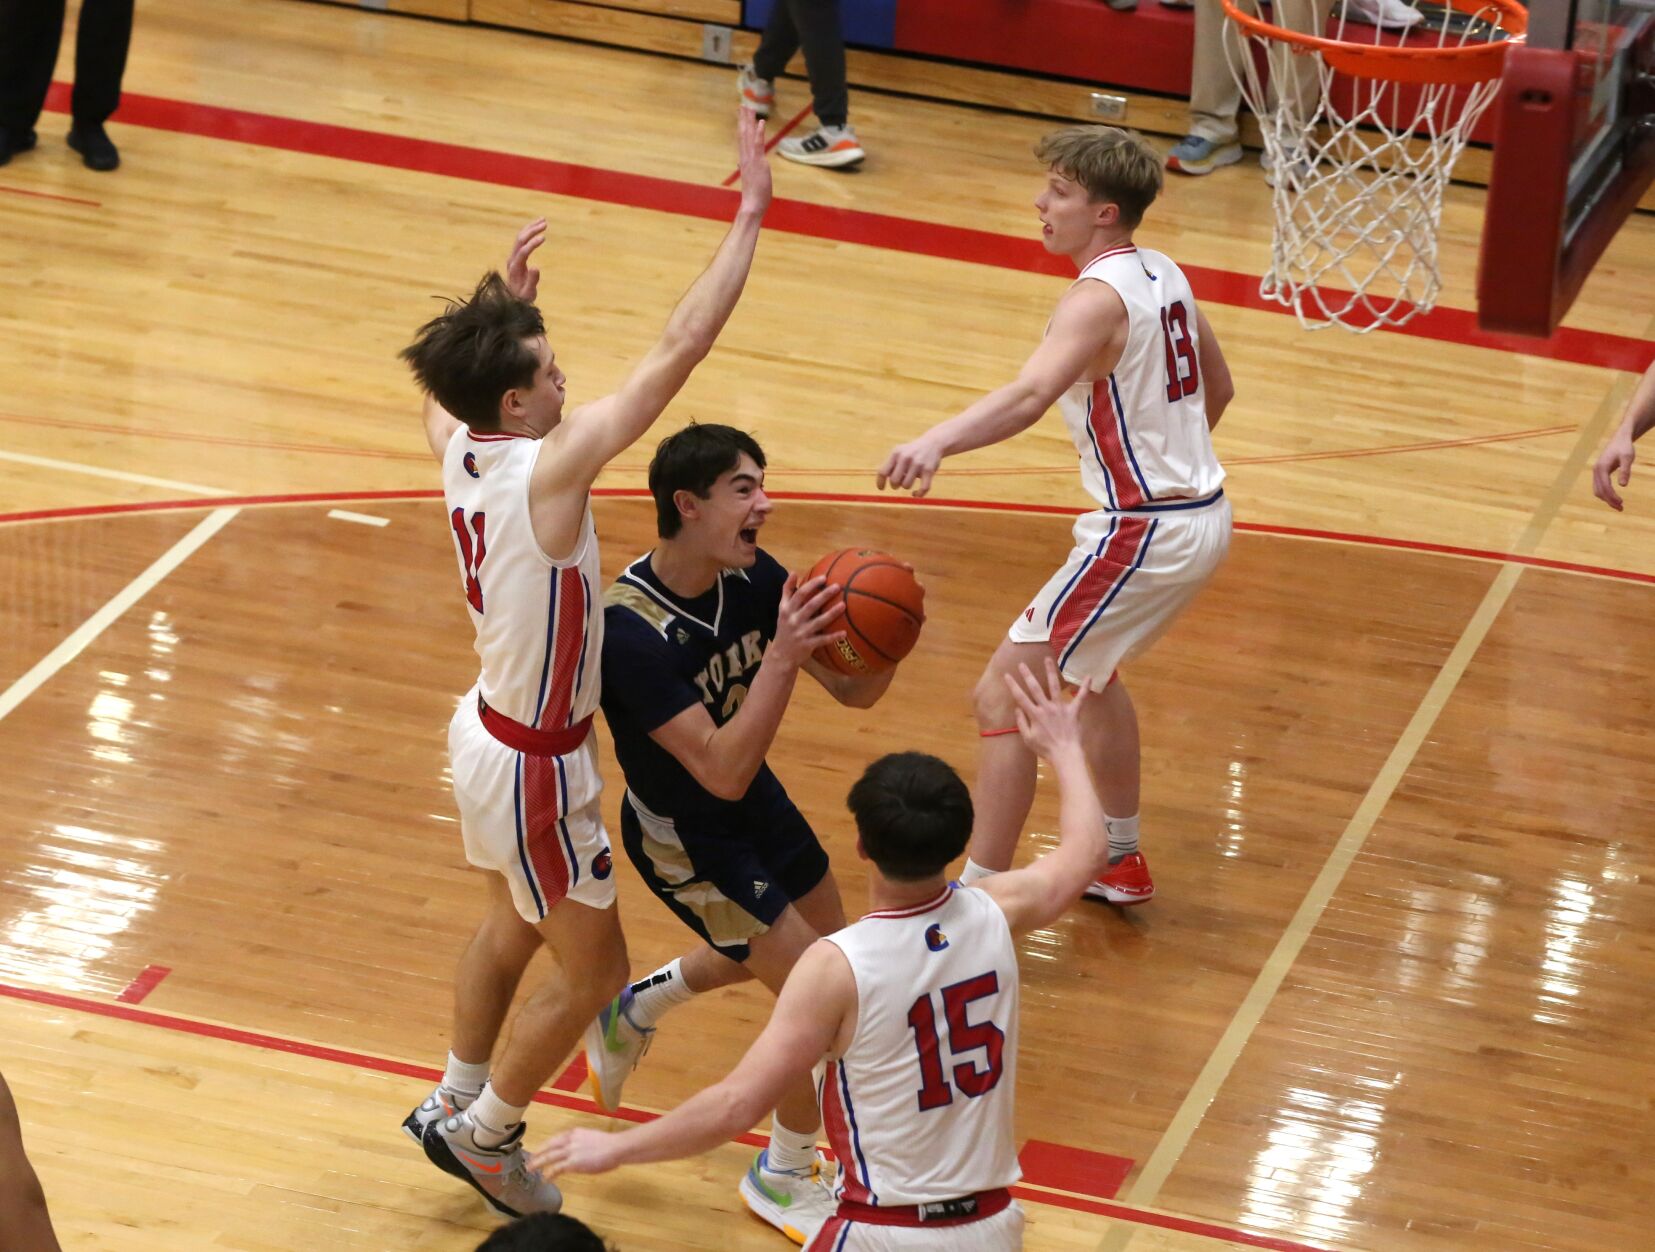 Crete Cardinals Dominate York Dukes in B-1 Final with 85-45 Victory